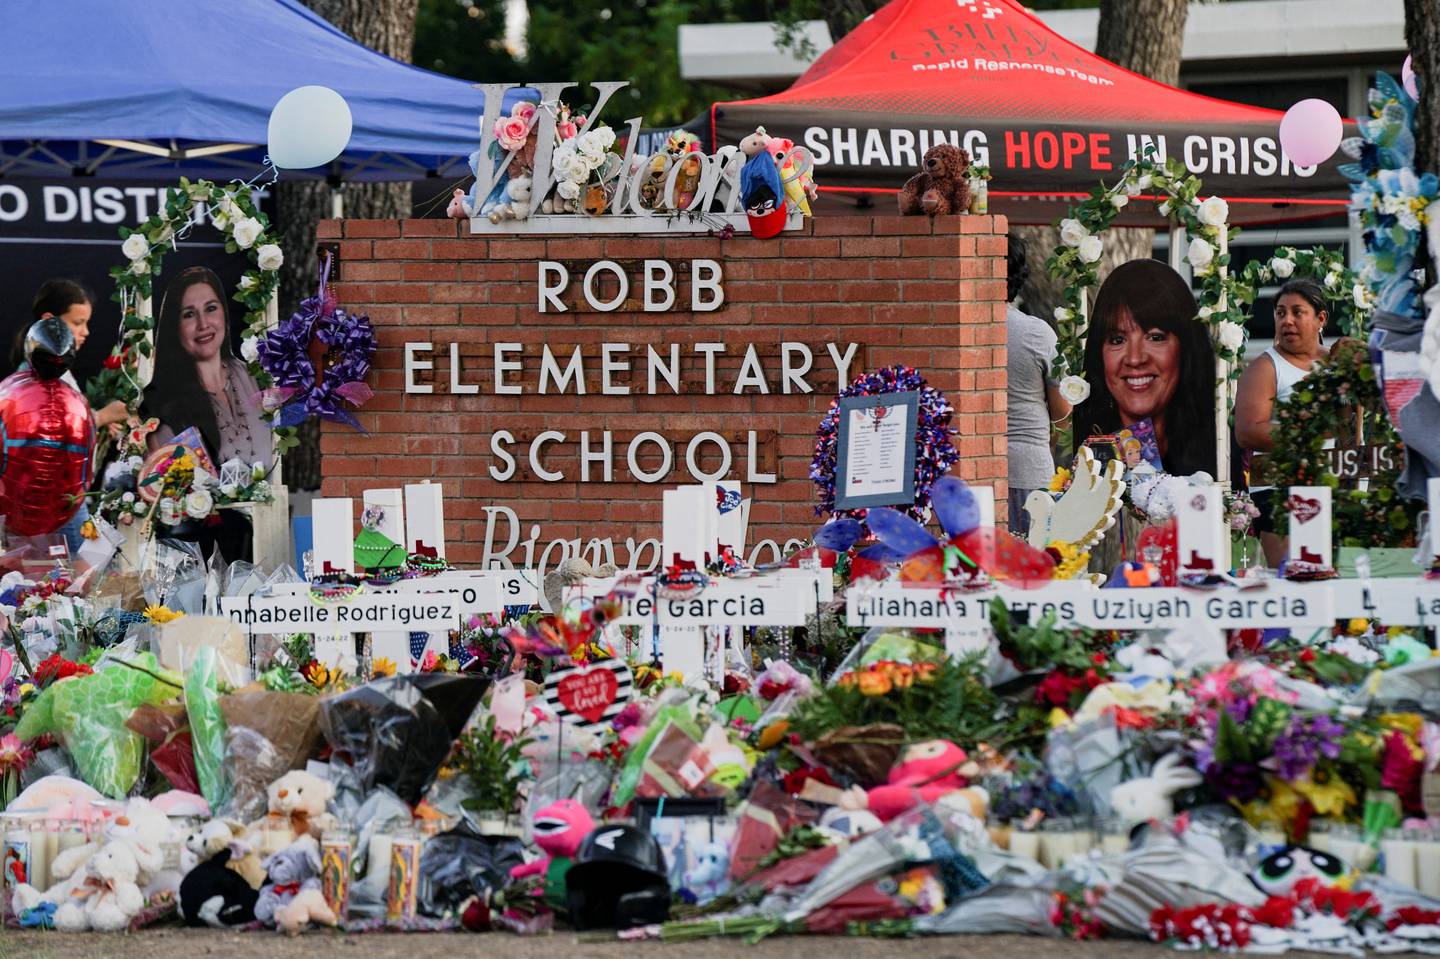 A shooting at a Texas elementary school in May left 19 children and two teachers dead. Reuters